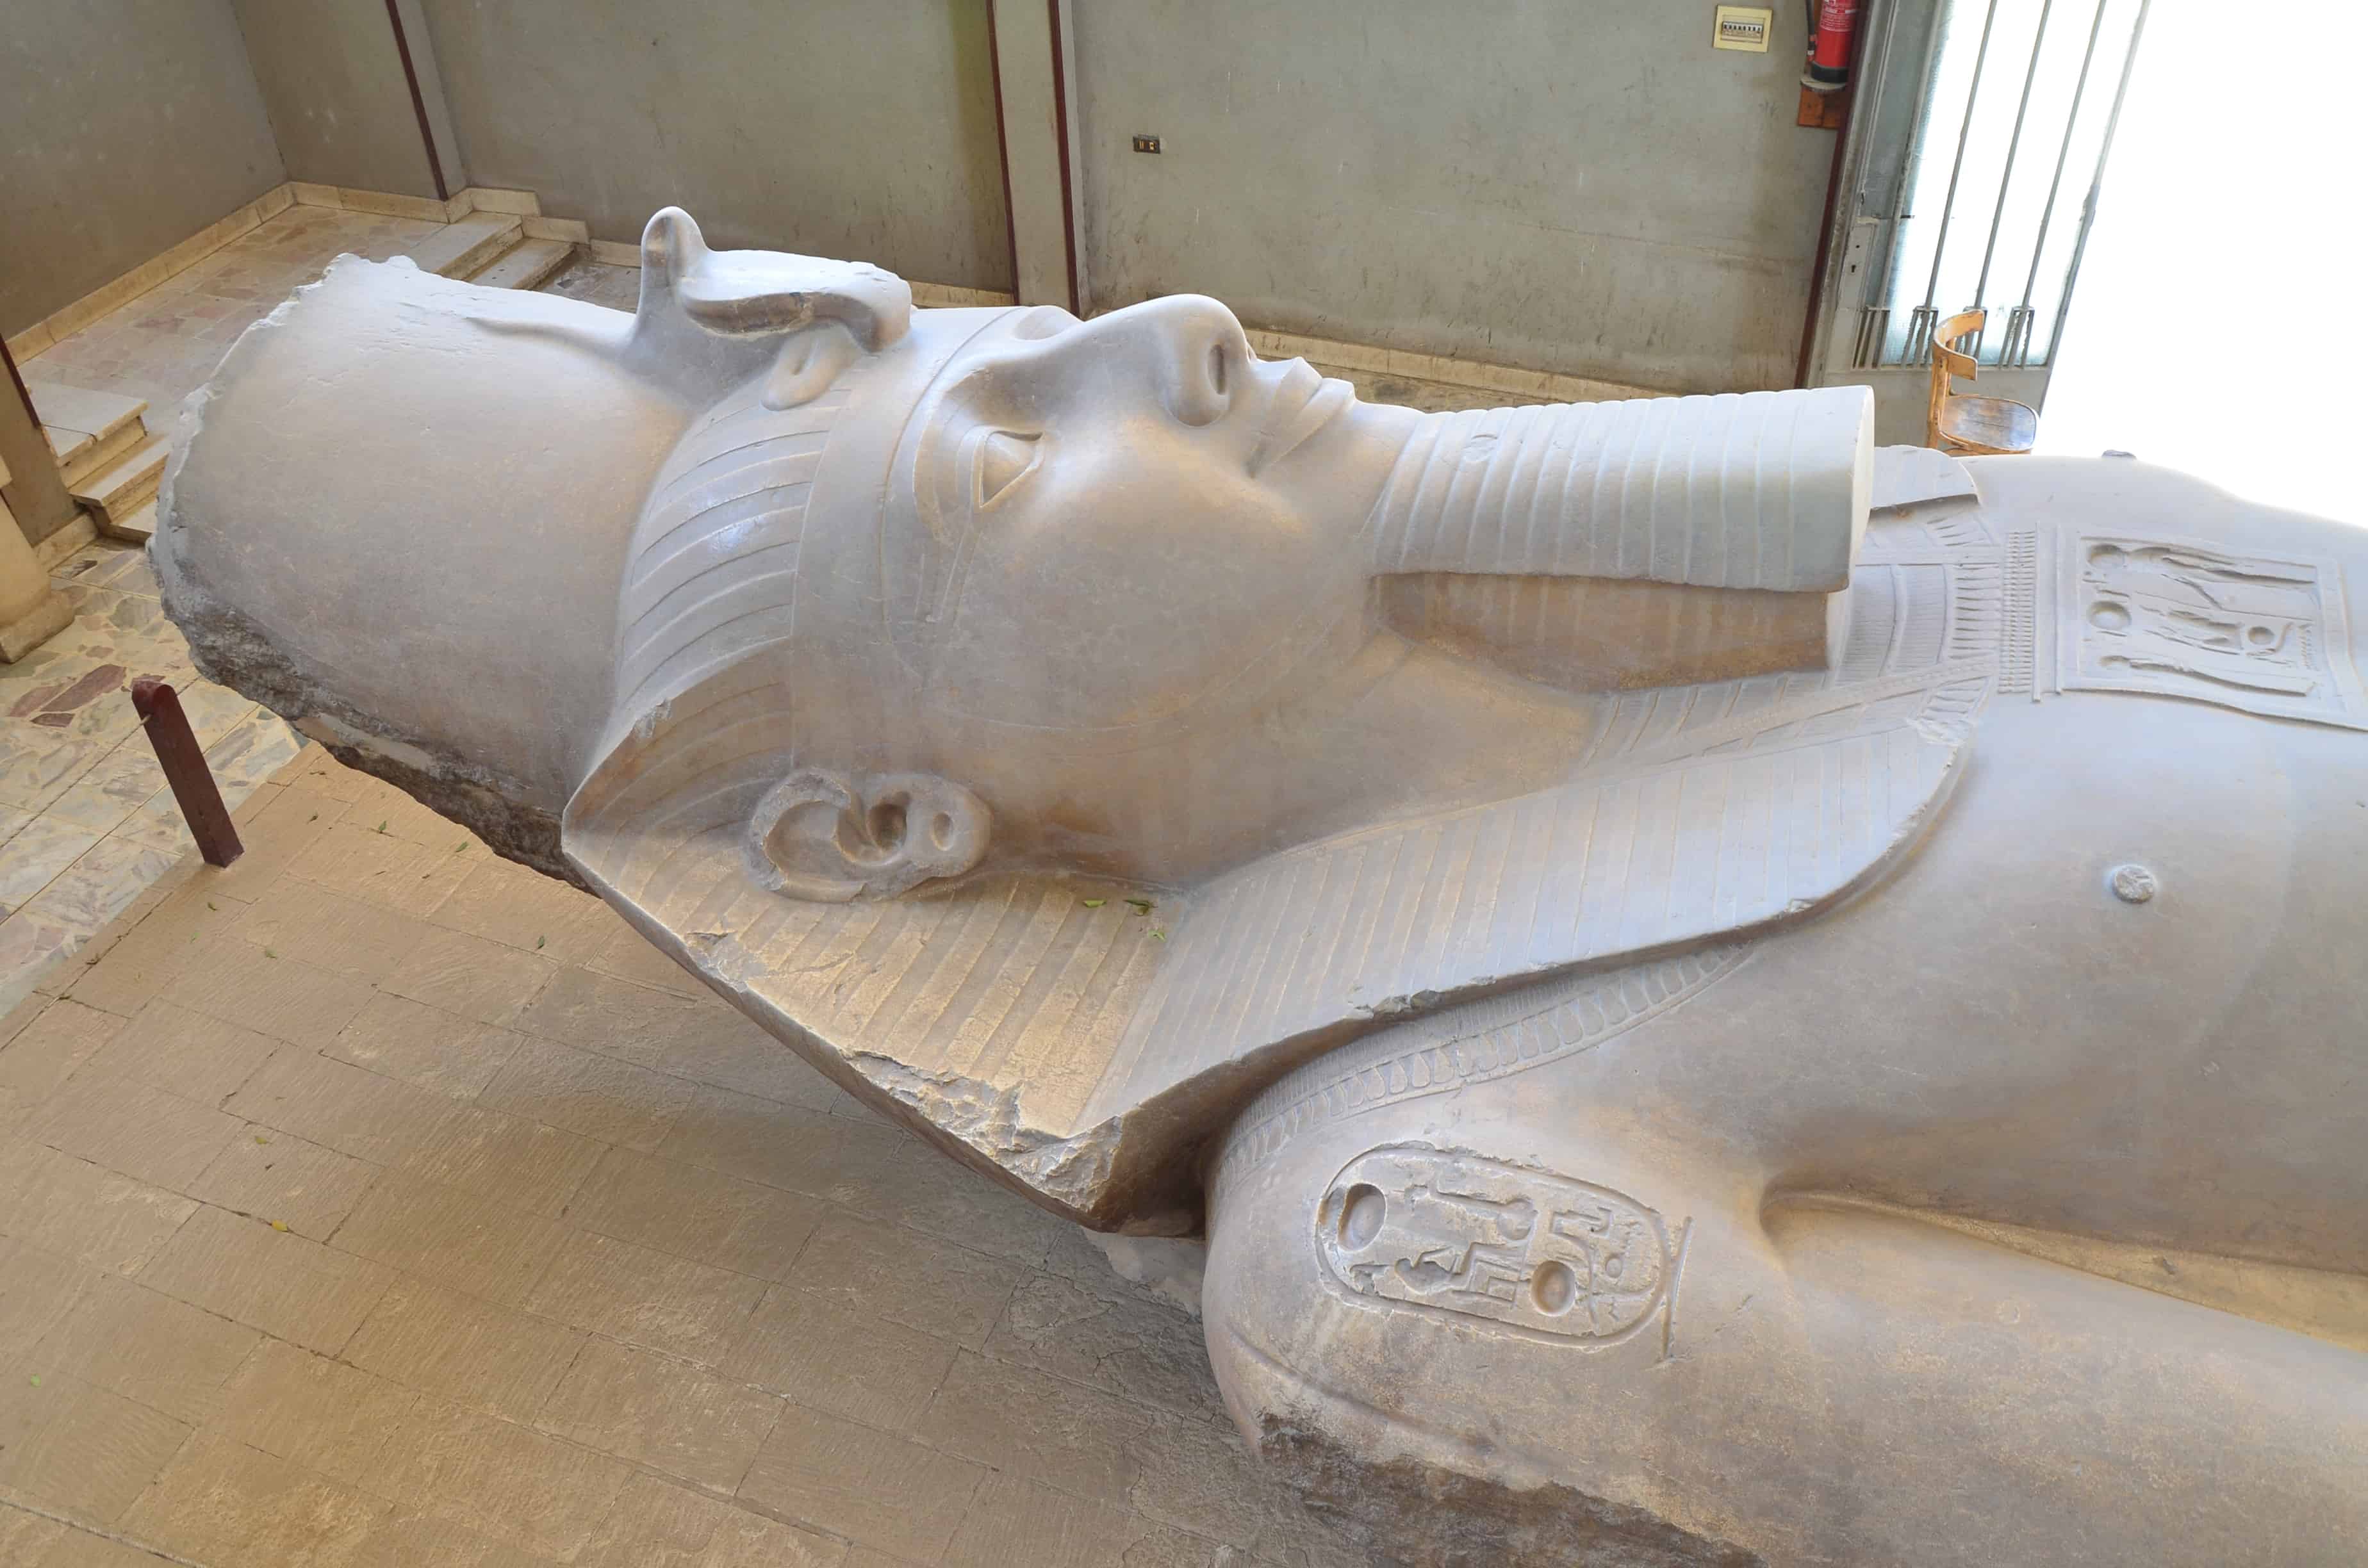 Colossus of Ramses II in Memphis, Egypt